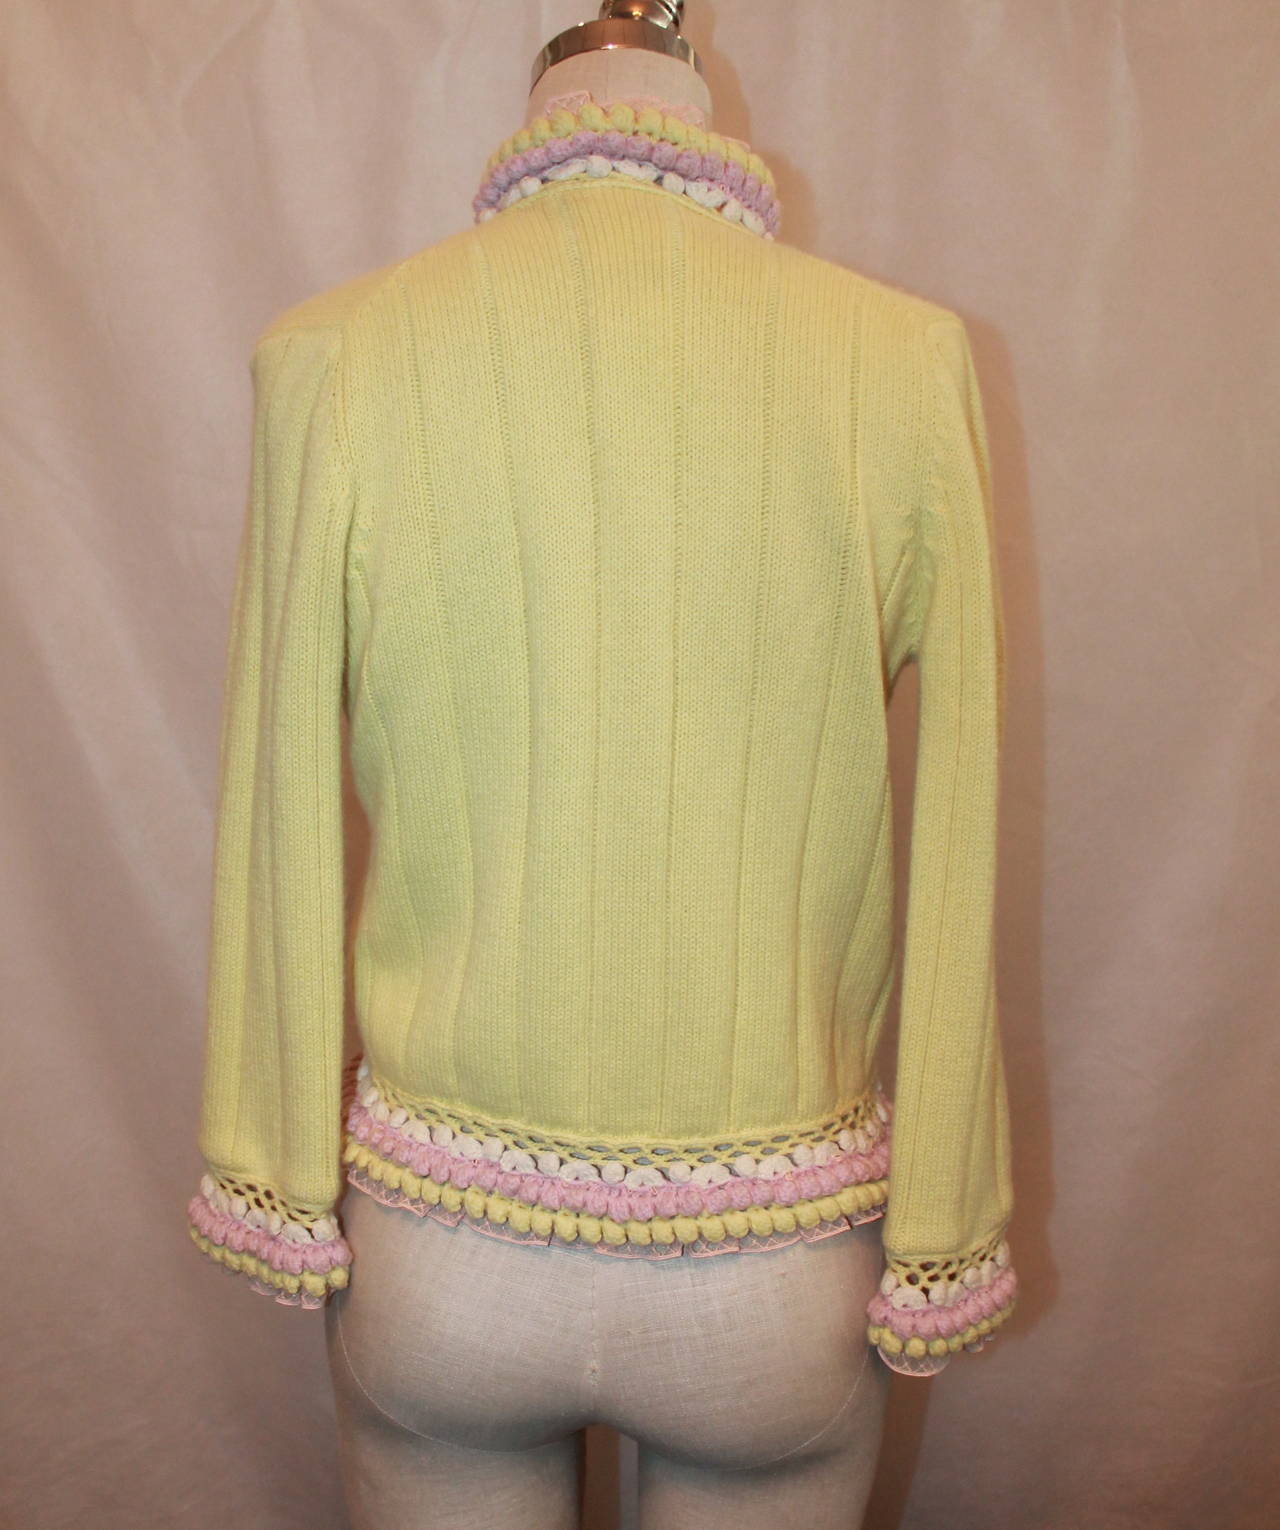 Women's Chanel 2004 Yellow & Pink Cashmere Cardigan - 38